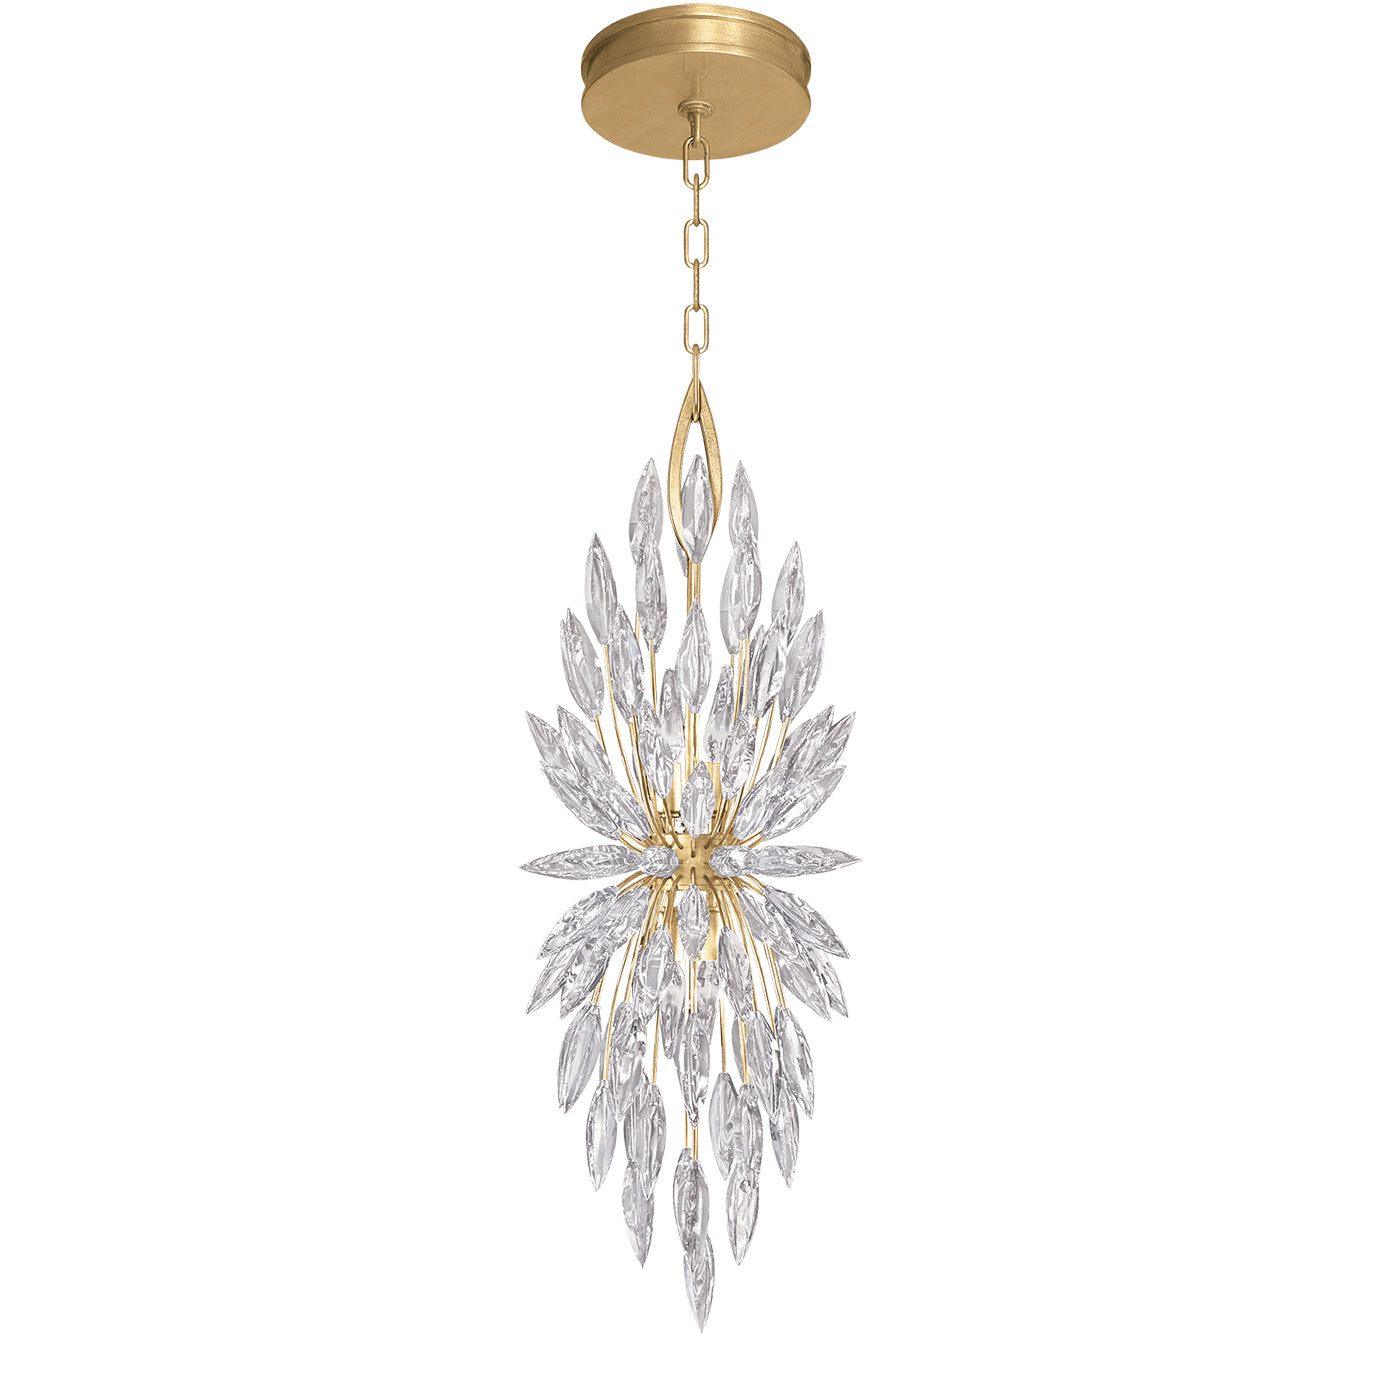 Fine Art Handcrafted Lighting Lily Buds Pendant Chandeliers Fine Art Handcrafted Lighting Gold 13 x 37 